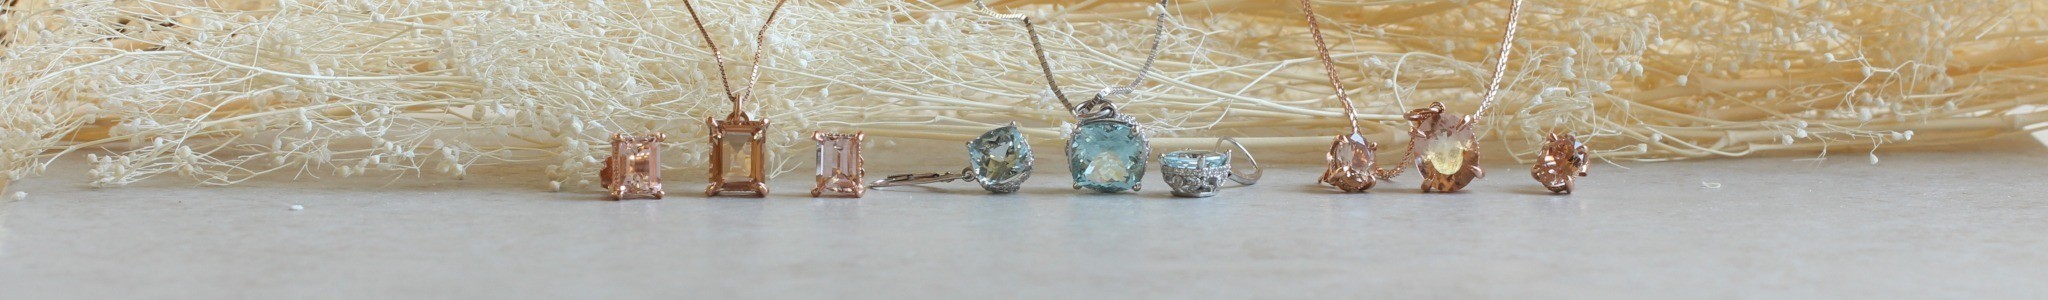 Bridal Jewelry Product Line Image